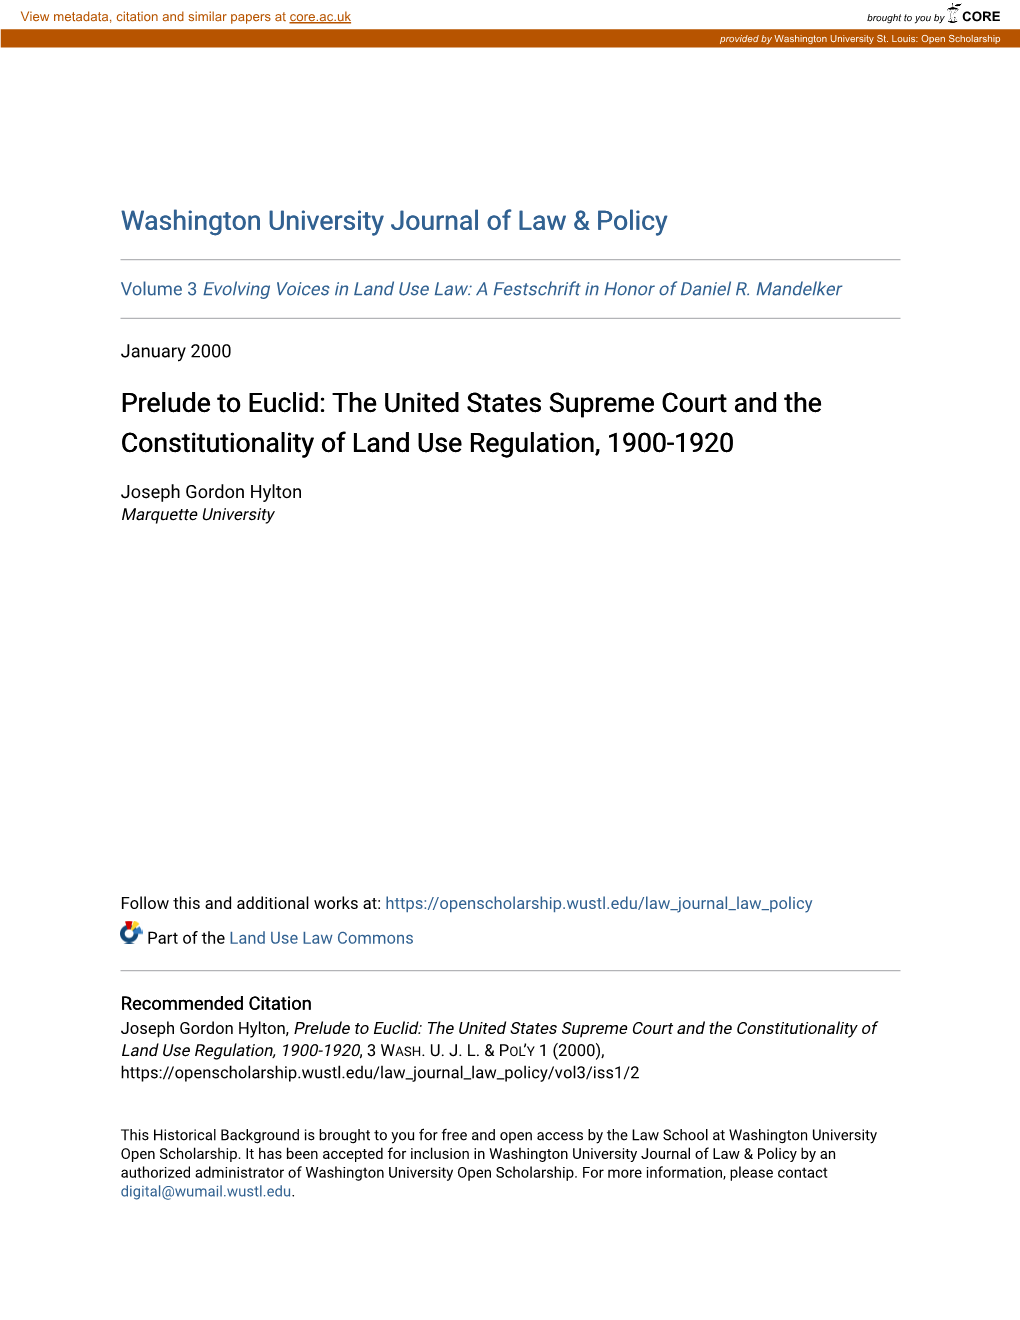 Prelude to Euclid: the United States Supreme Court and the Constitutionality of Land Use Regulation, 1900-1920